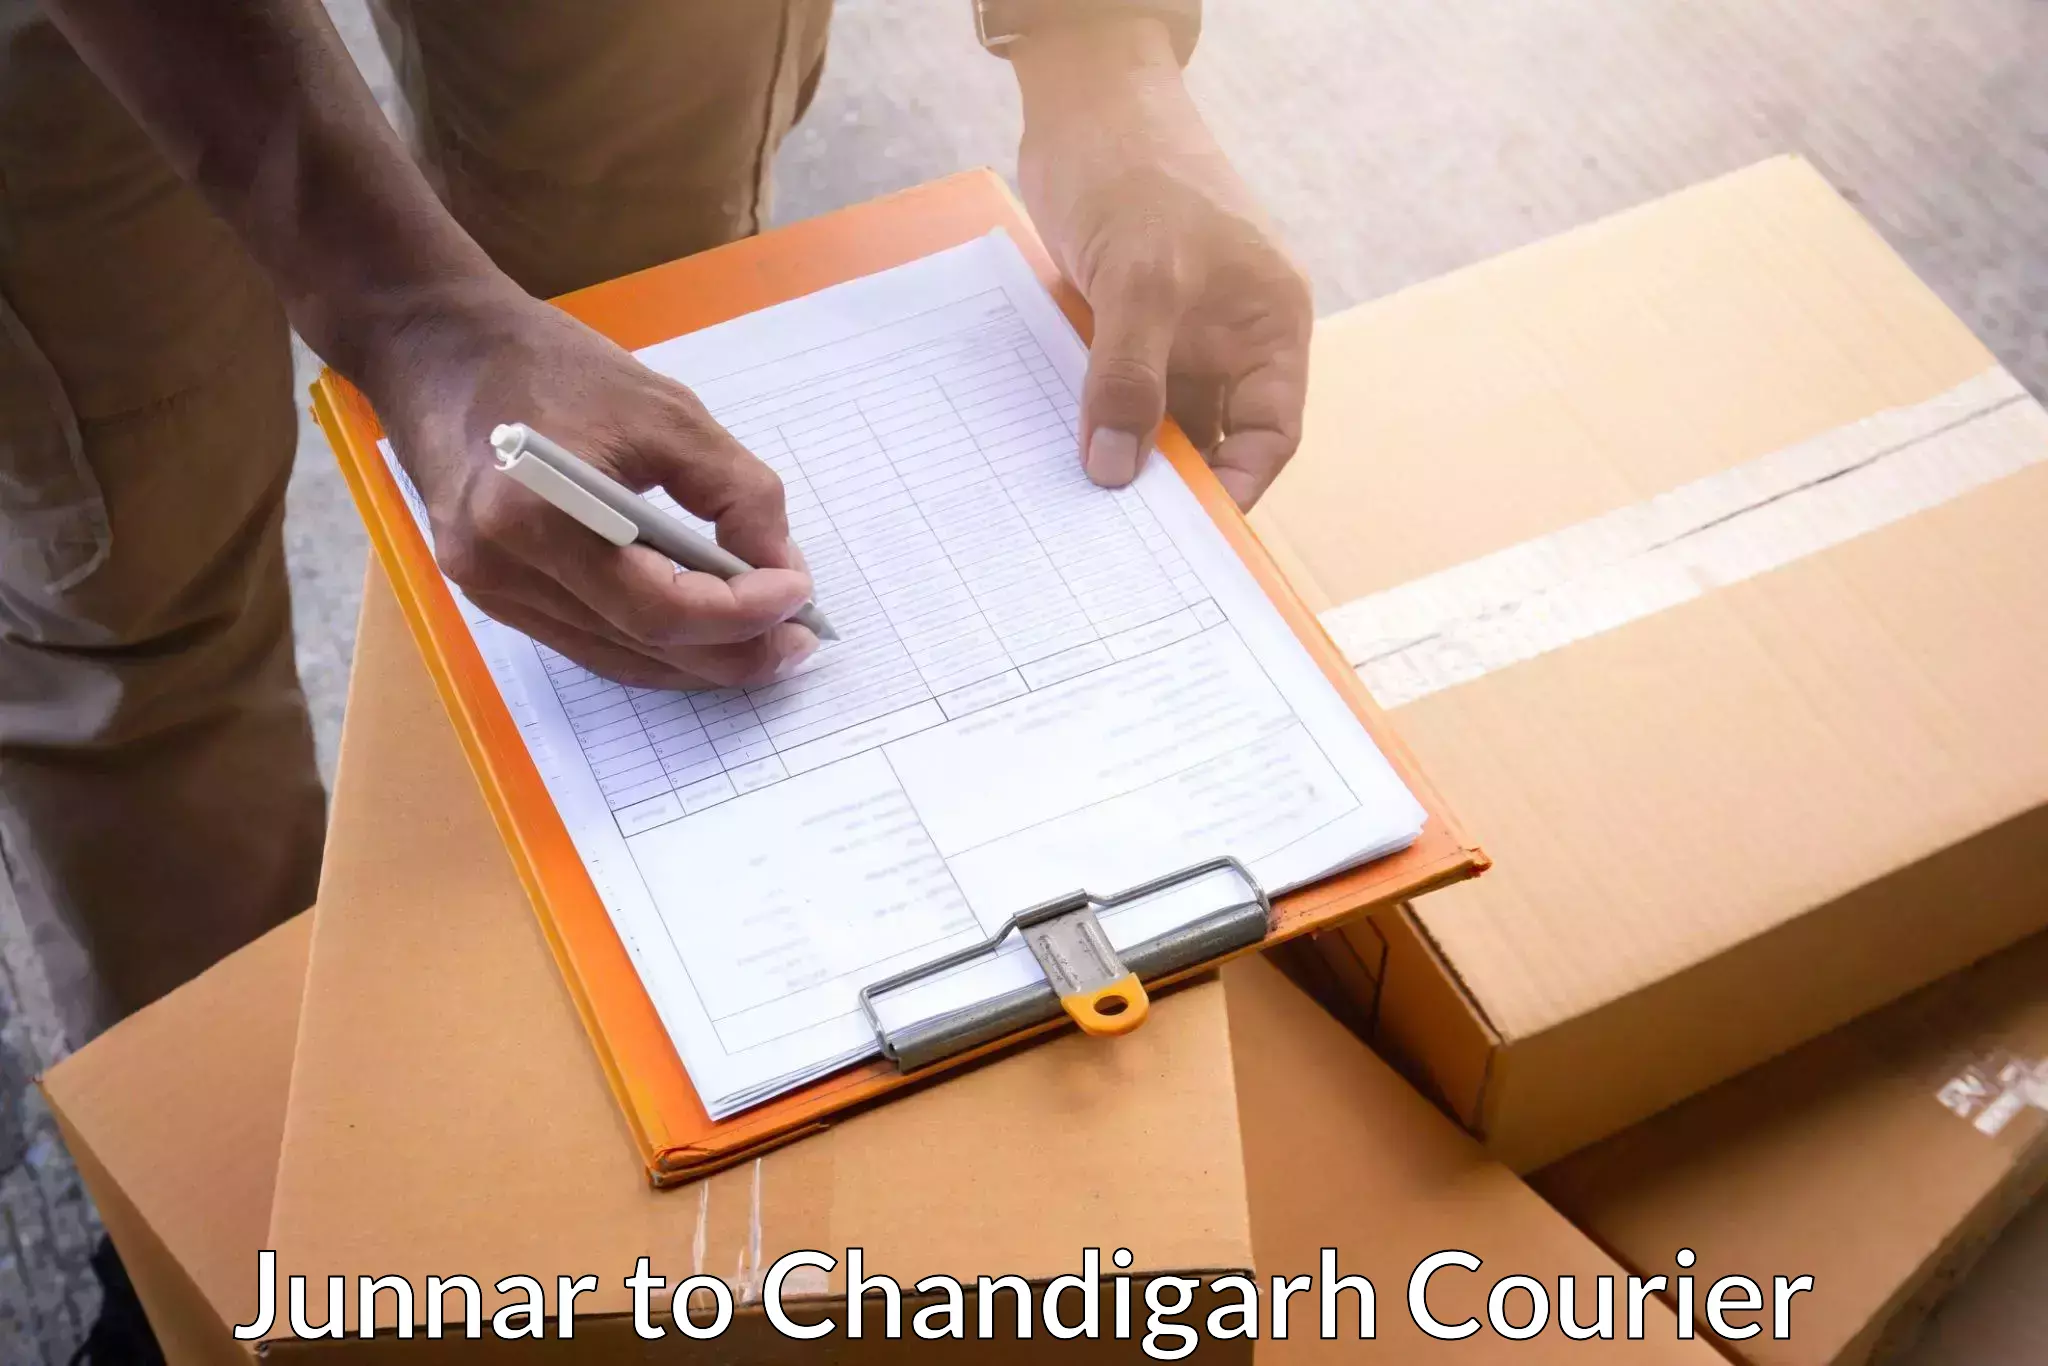 Cargo delivery service Junnar to Chandigarh